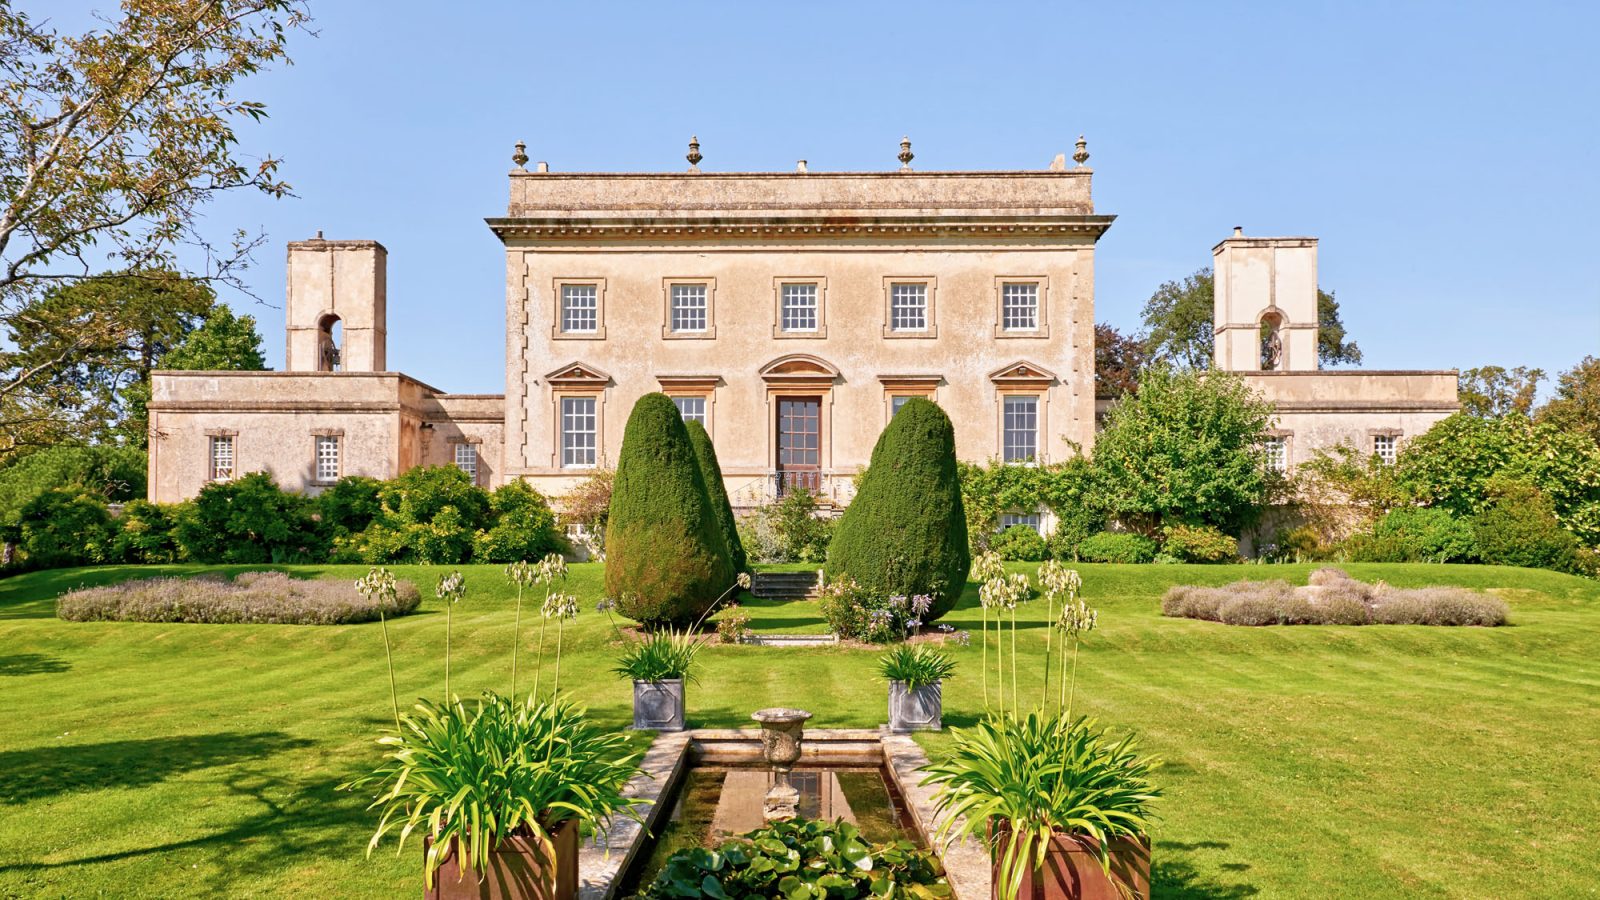  Frampton Court - kate & tom's Large Holiday Homes